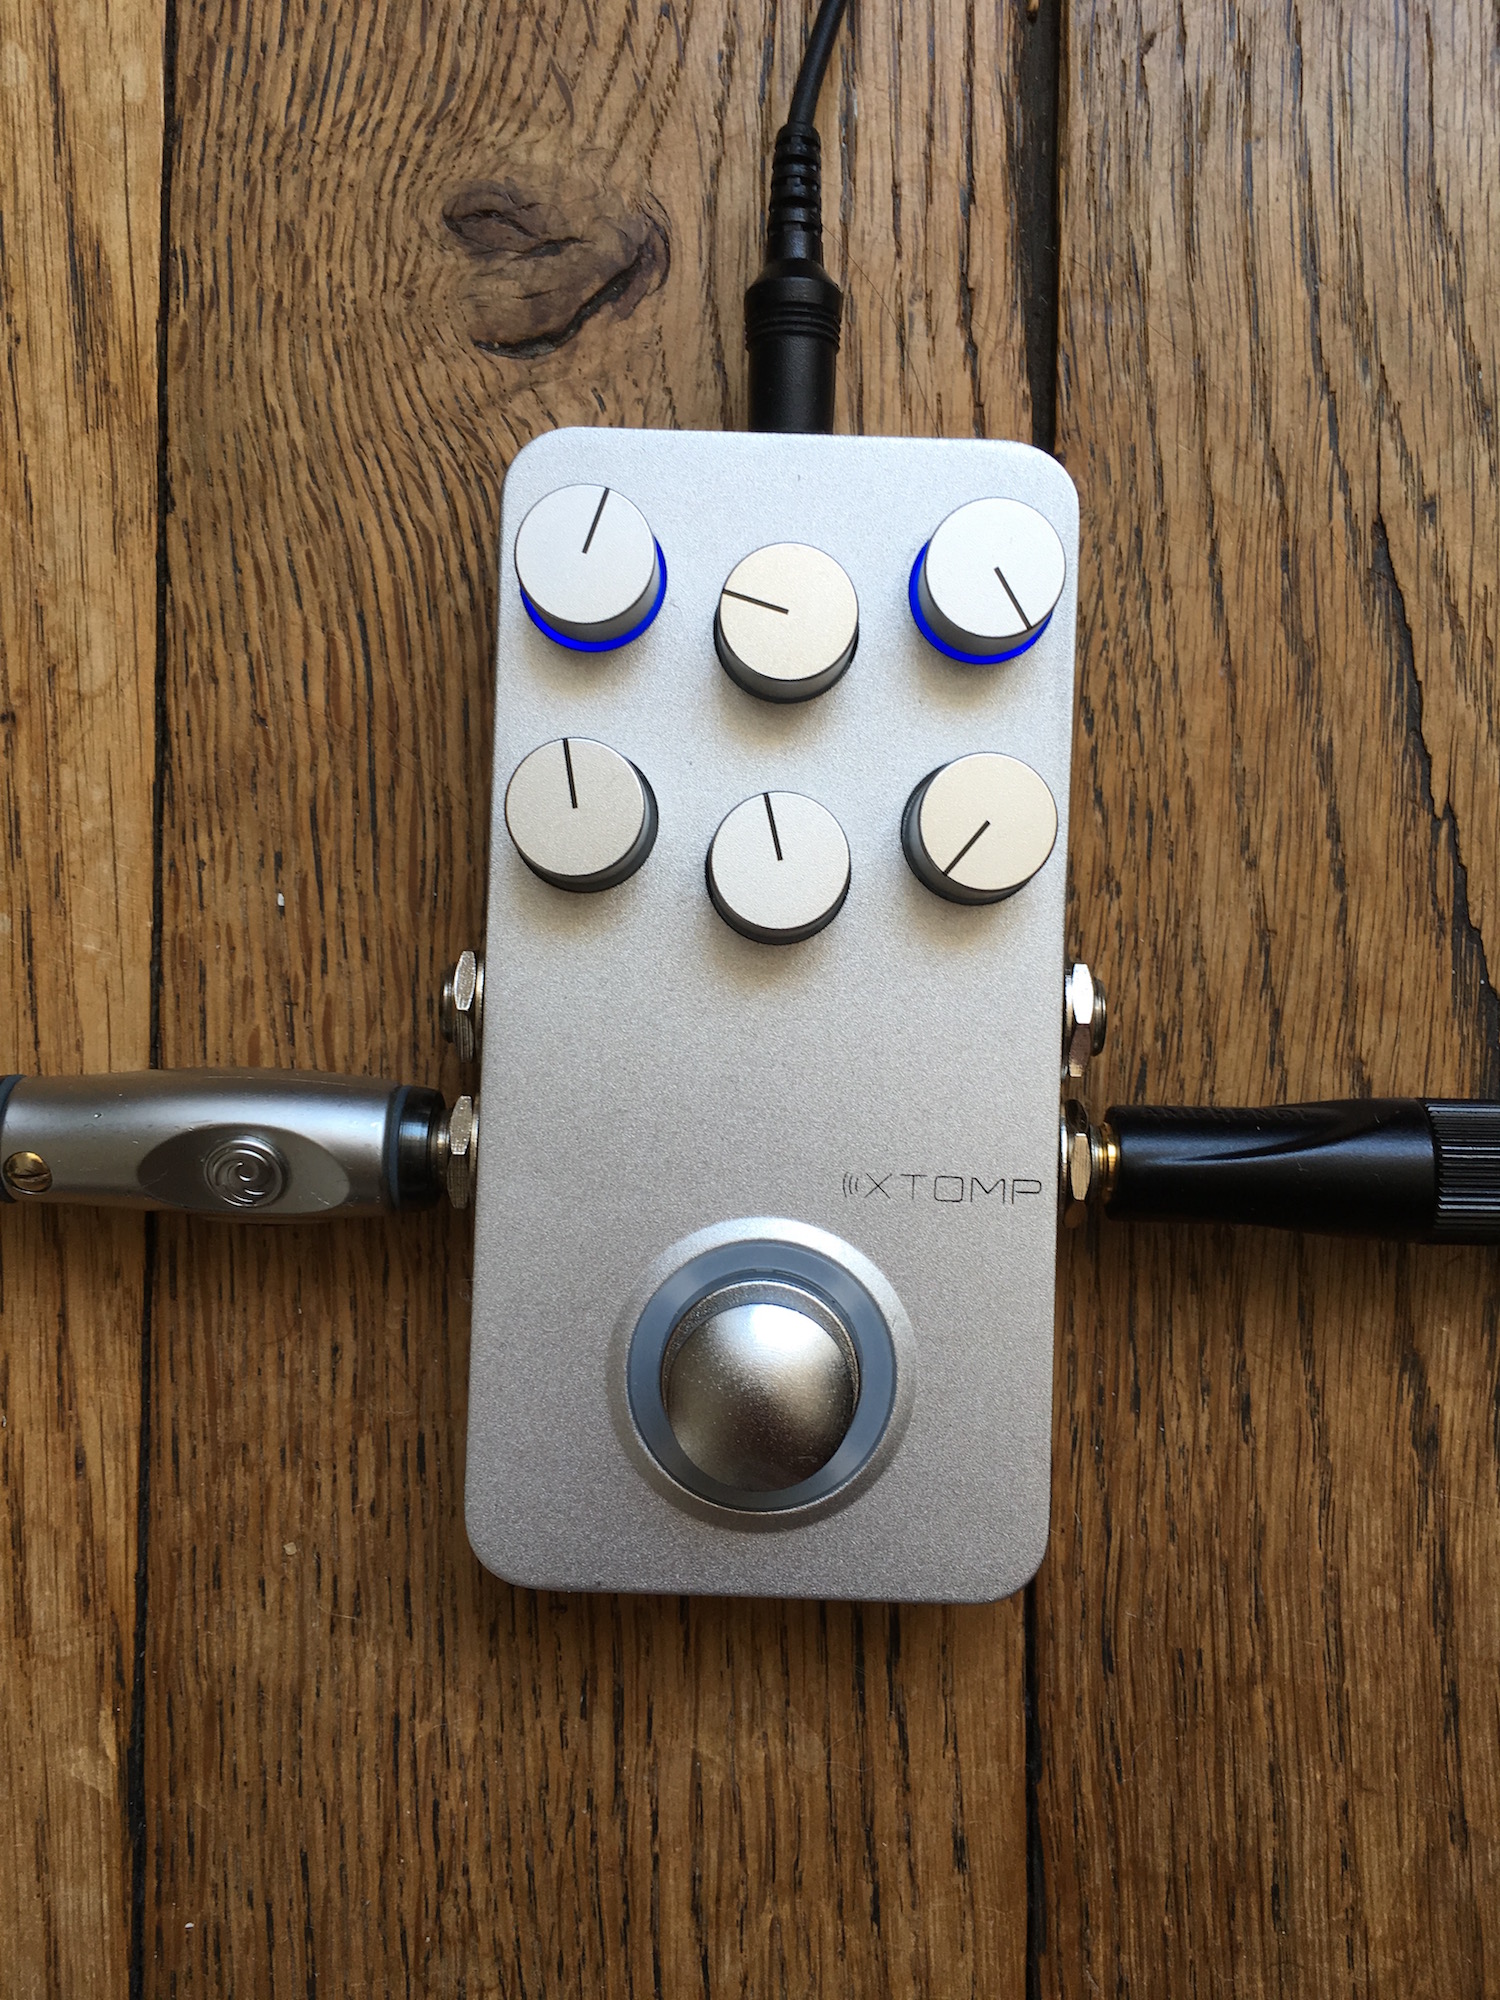 Xtomp Hotone - Pedal Review of a chameleon tone machine